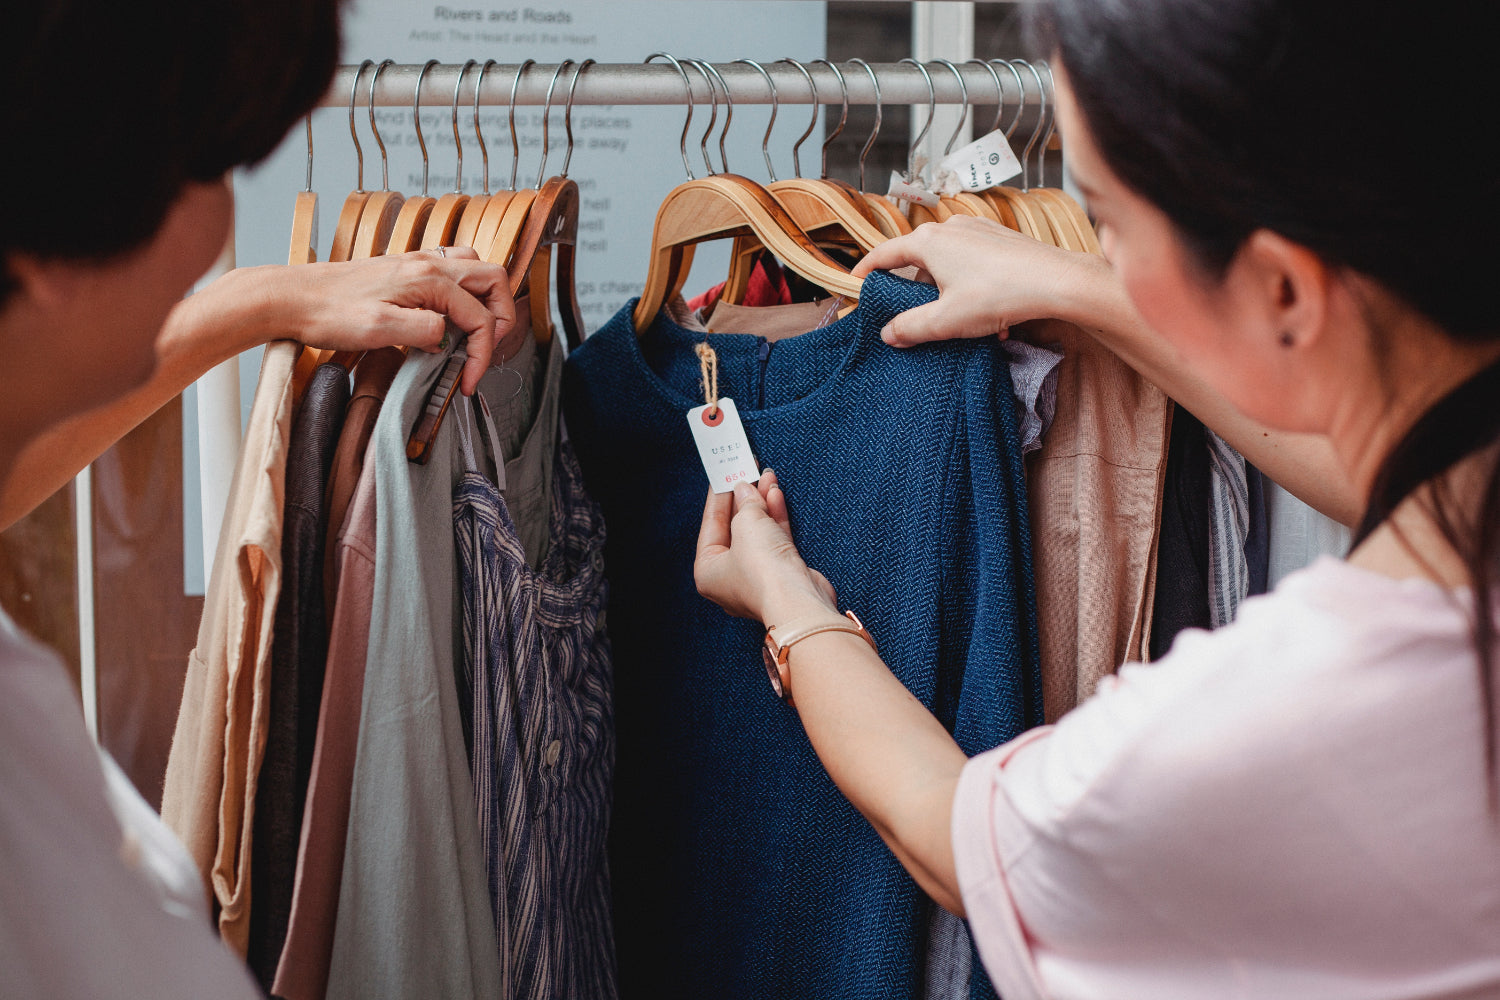 Two people look through a rack of clothes and examine the tags